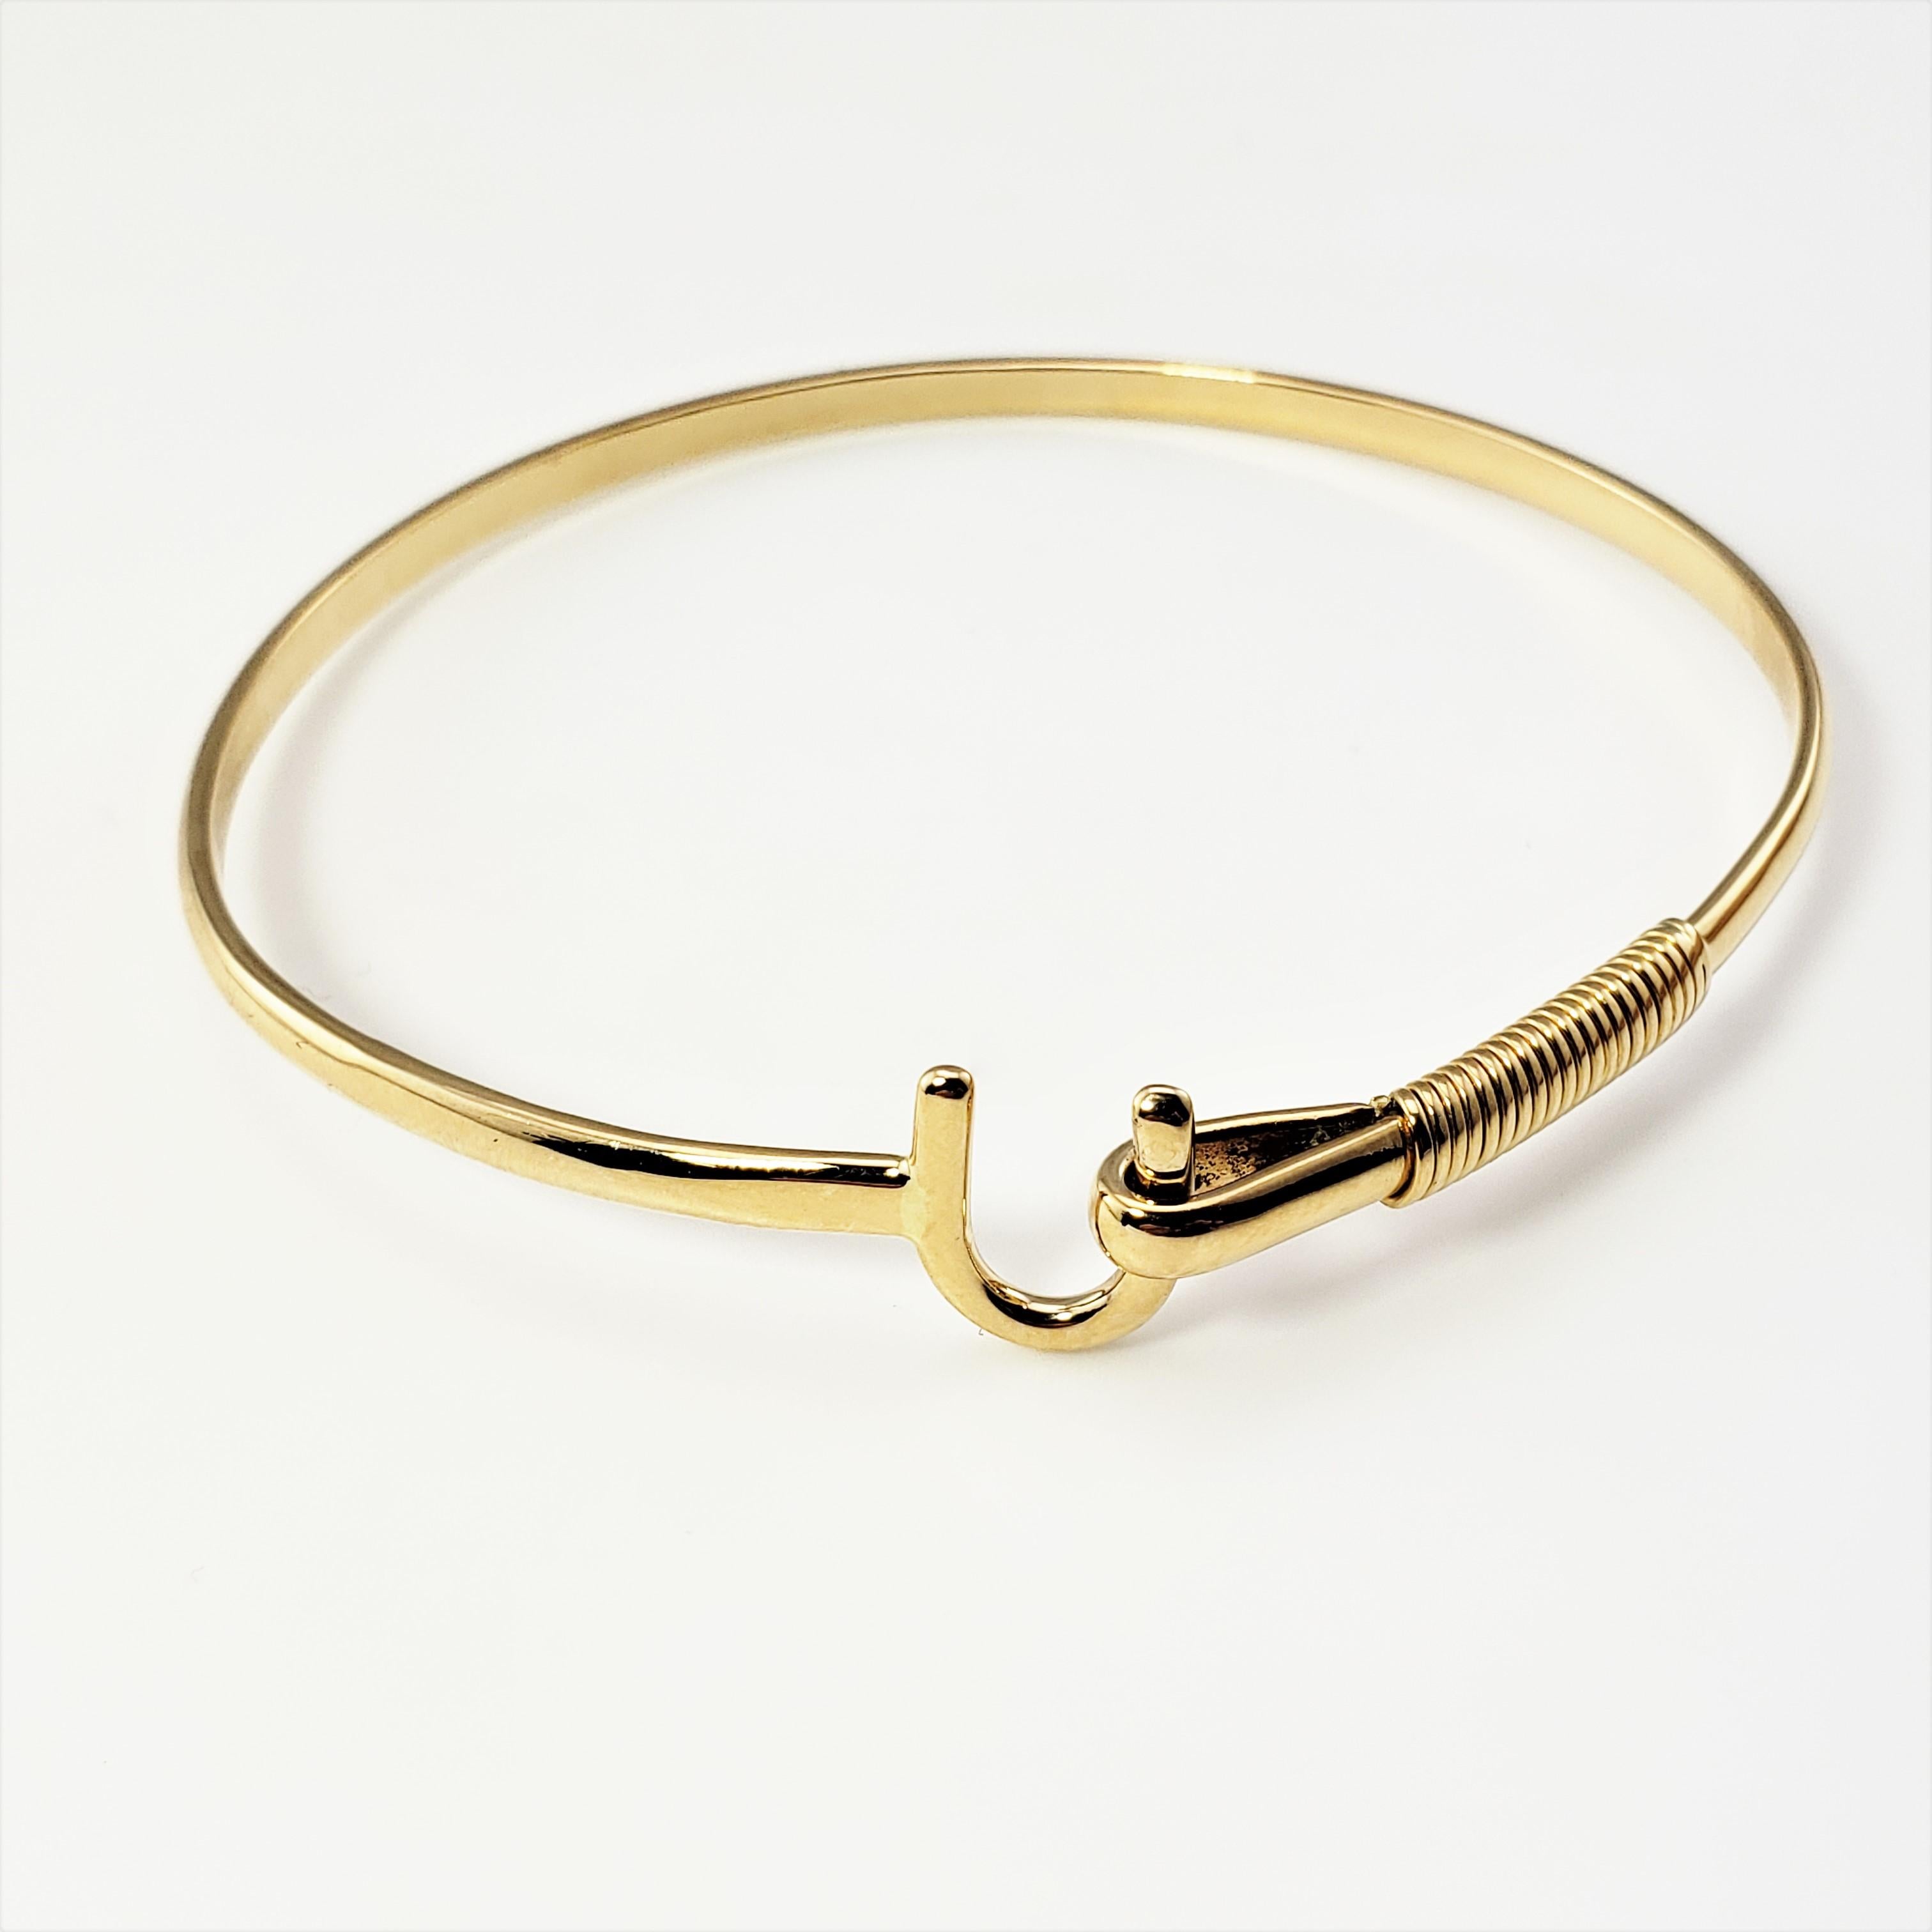 Vintage 14 Karat Yellow Gold St. John's Hook Bangle Bracelet-

This elegant bracelet feature a front hook closure crafted in beautifully detailed 14K yellow gold. Width: 11 mm.

If the hook is worn inwards, it means your heart is caught. If you are